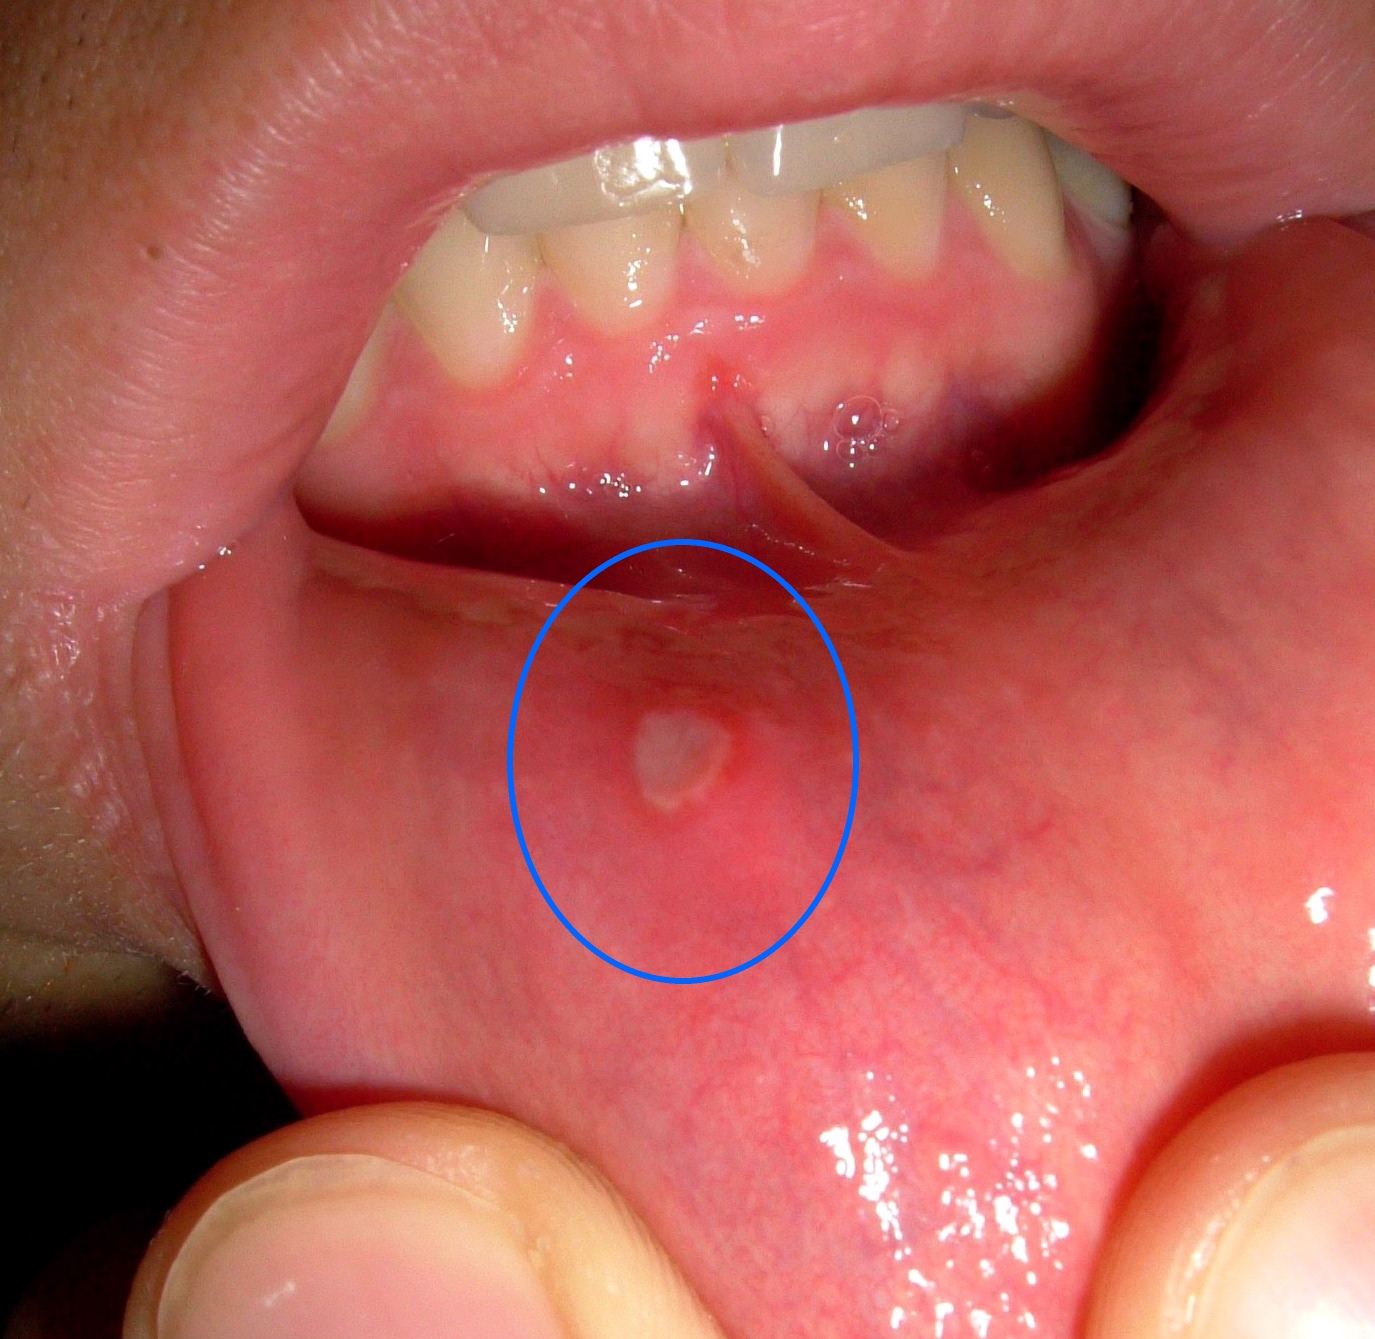 Oral aphthous ulceration